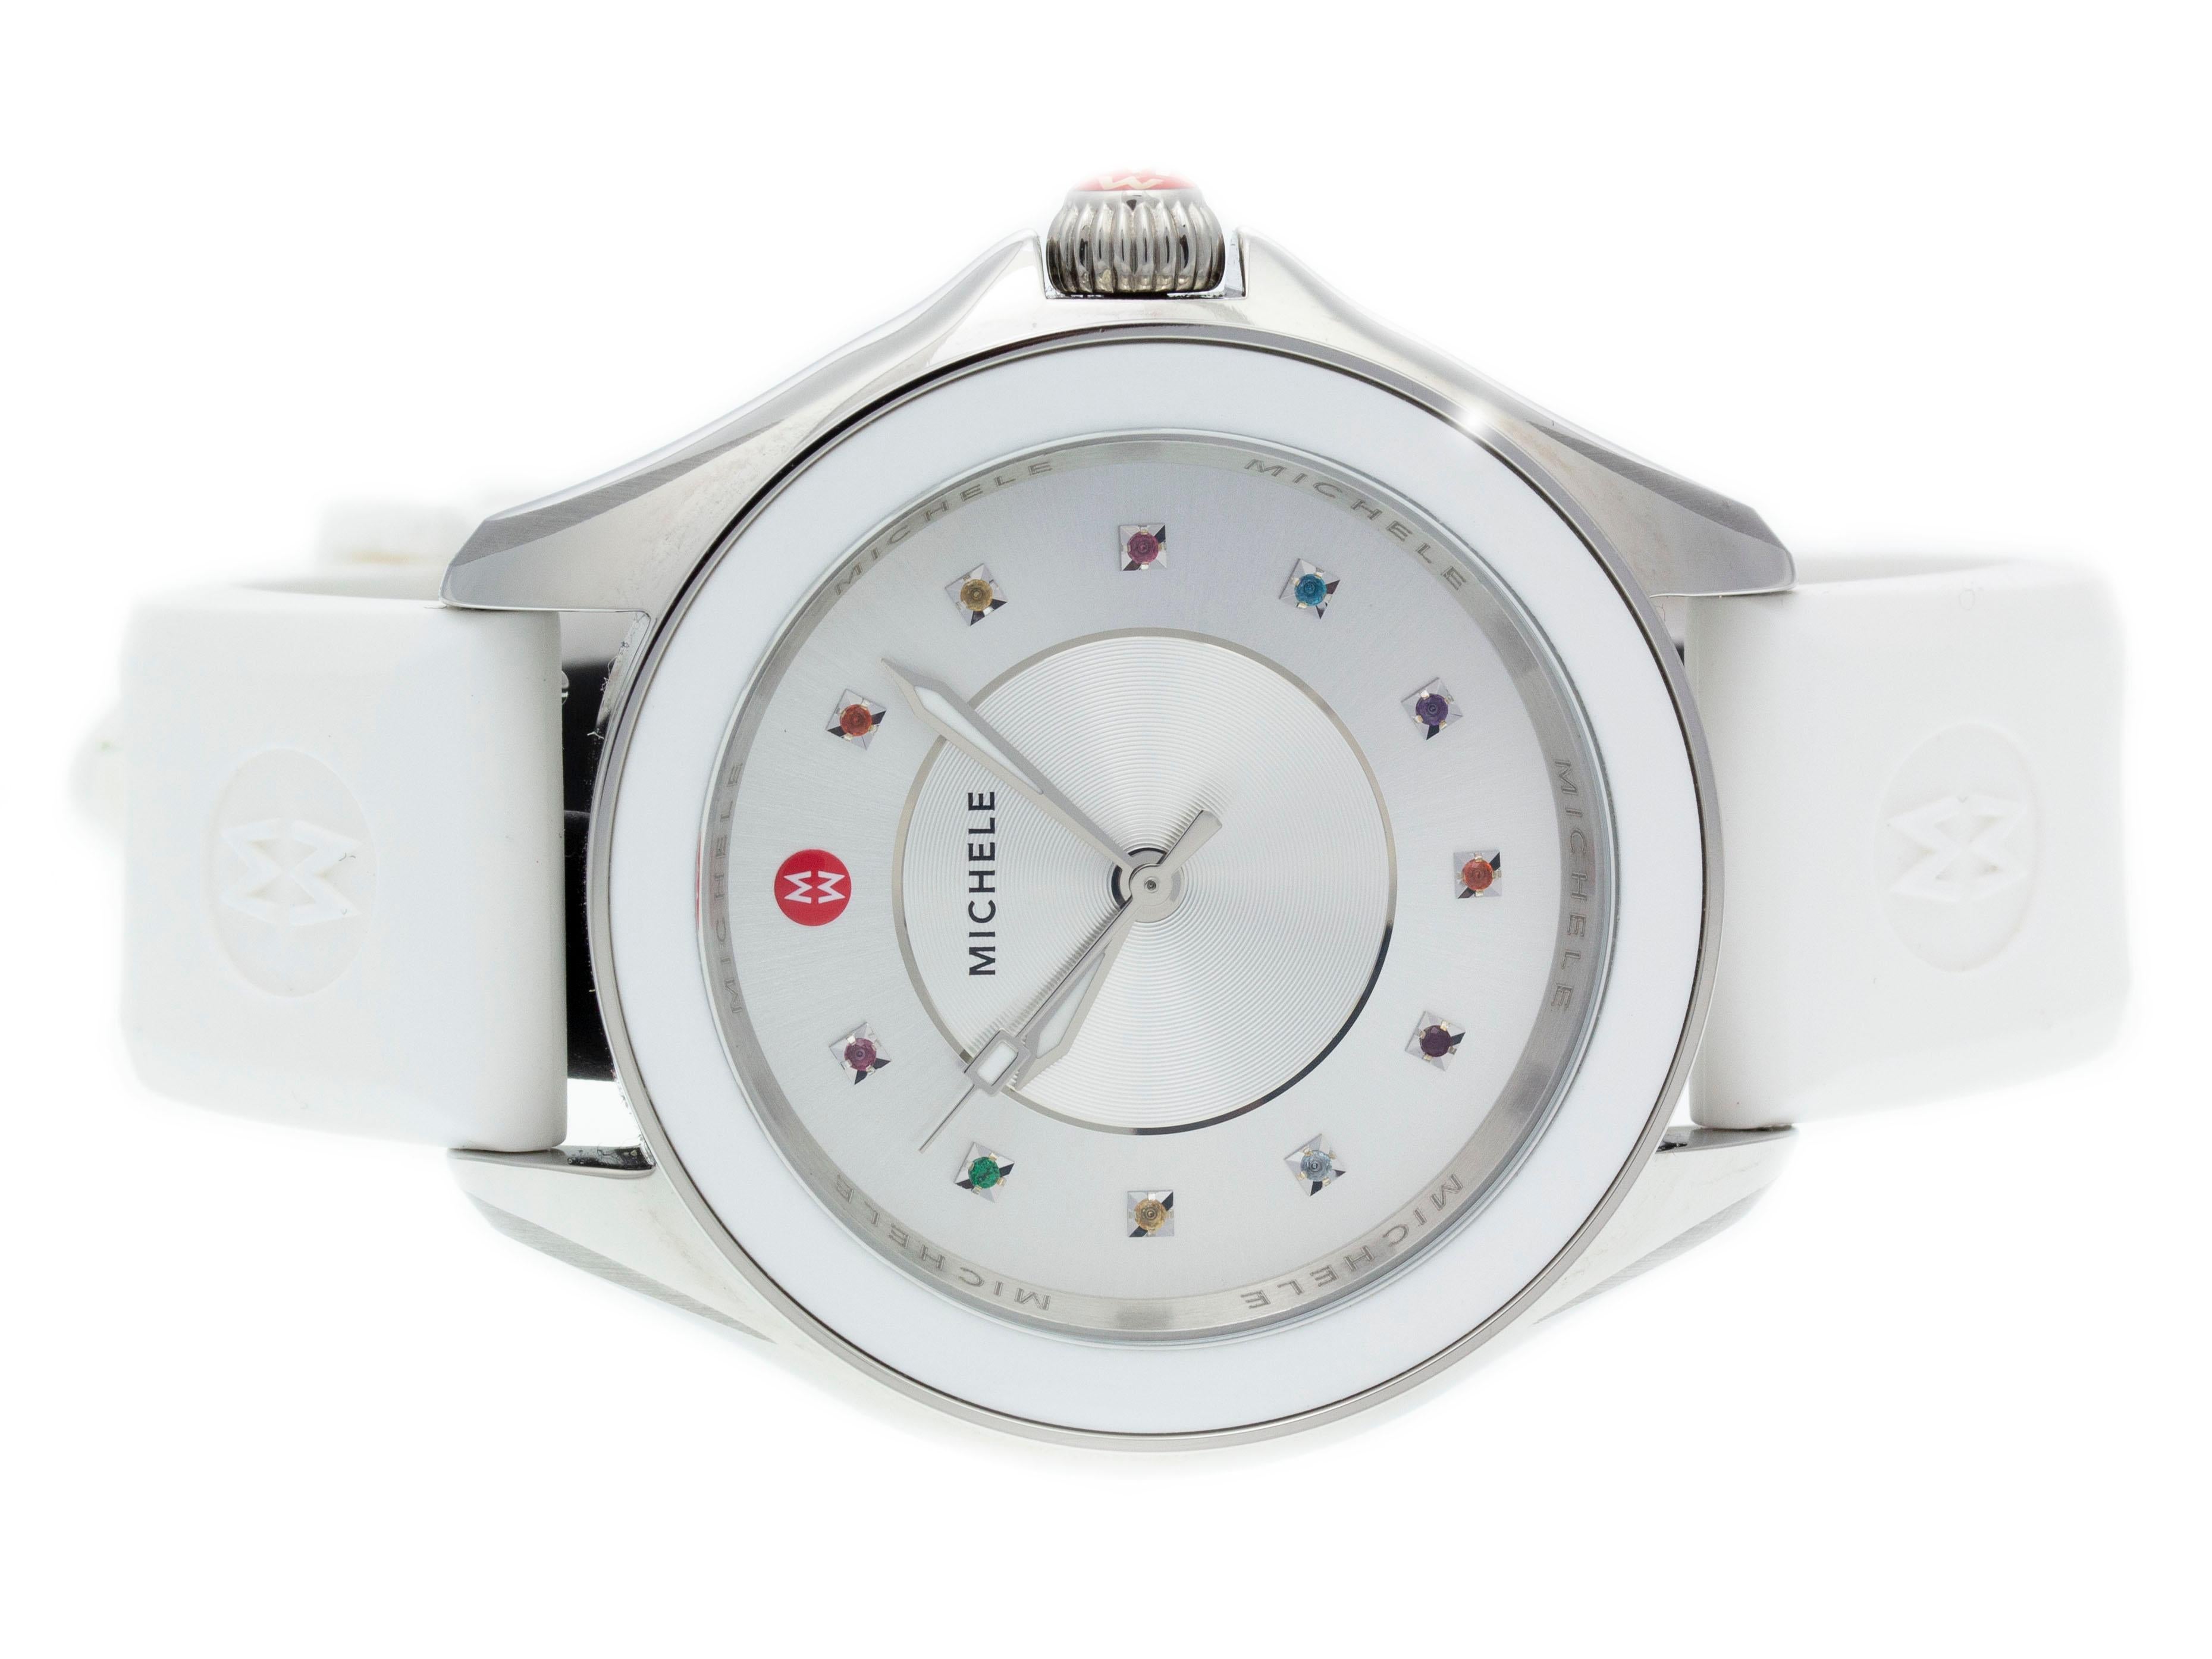 Brand	Michele
Series	Cape
Model	MWW27A000007
Gender	Ladies
Condition	Good Pre-owned, Light Scratches & Tiny Dings on Case & Bezel
Material	Steel
Finish	Polished
Caseback	Stainless Steel
Diameter	40mm
Thickness	11mm
Bezel	Fixed White